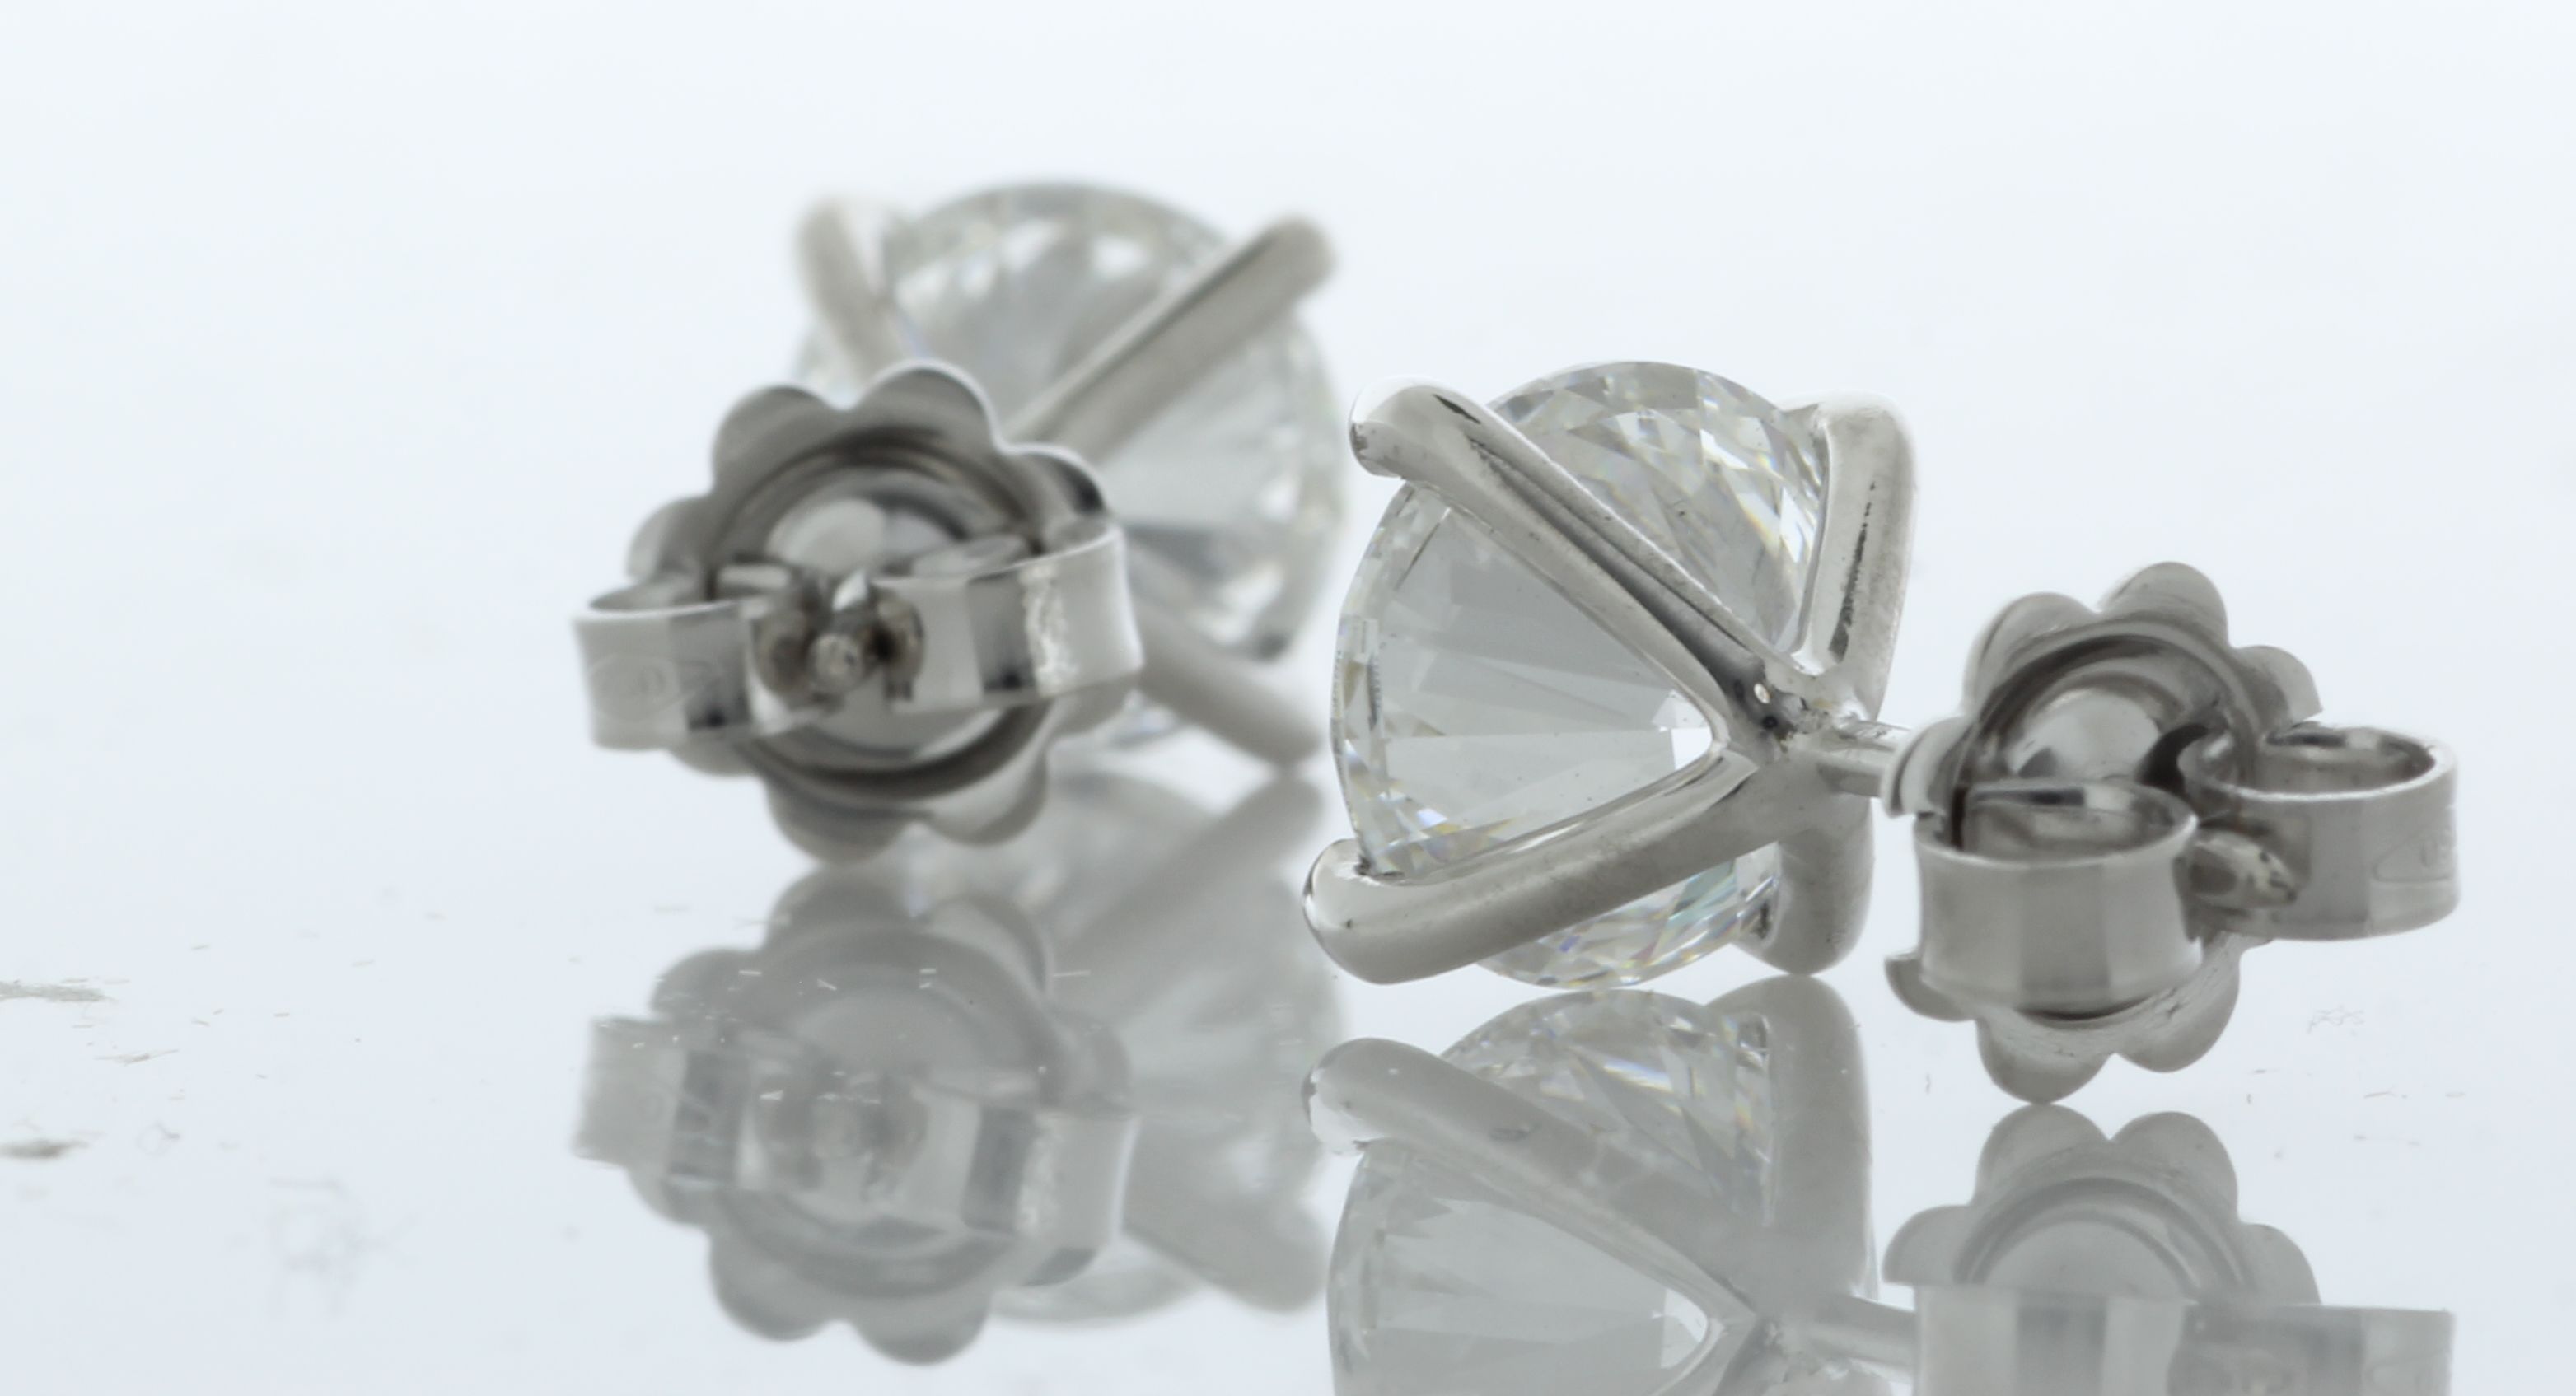 18ct White Gold LAB GROWN Diamond Earrings 4.05 Carats - Image 3 of 4